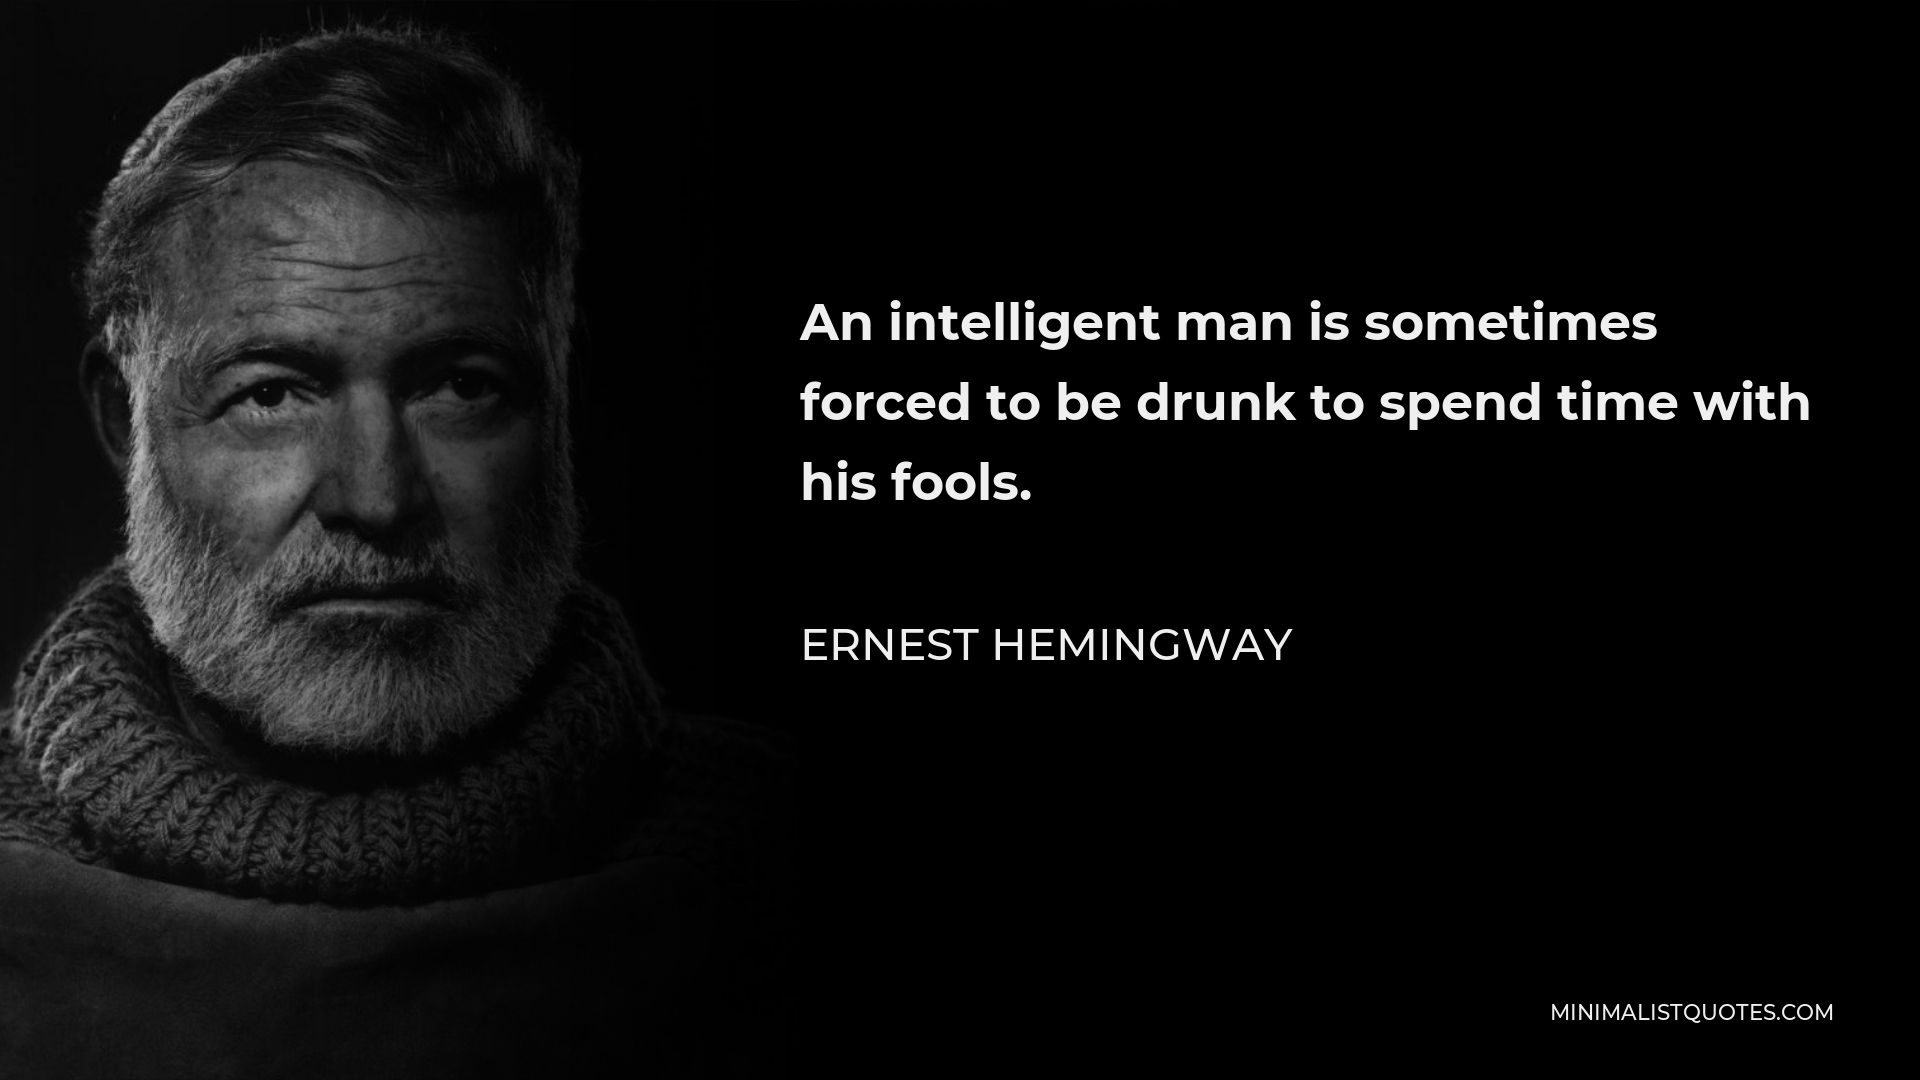 Ernest Hemingway Quote - An intelligent man is sometimes forced to be drunk to spend time with his fools.